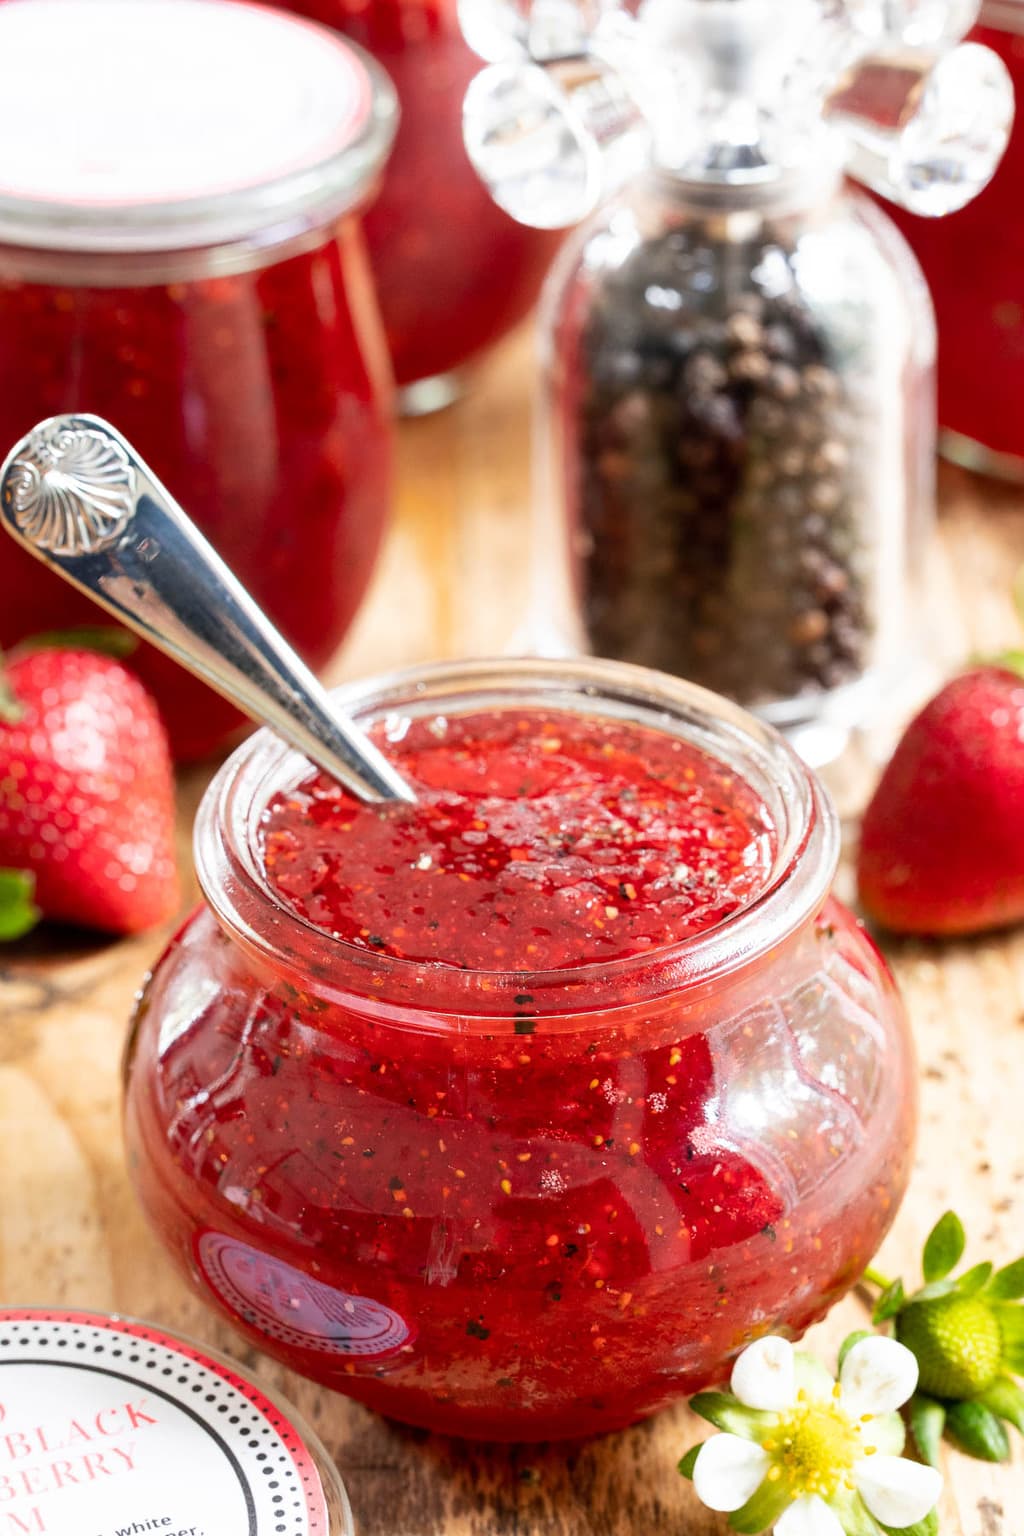 Vertical close up photo of Strawberry Balsamic Black Pepper Jam in a Weck jar with a spoon